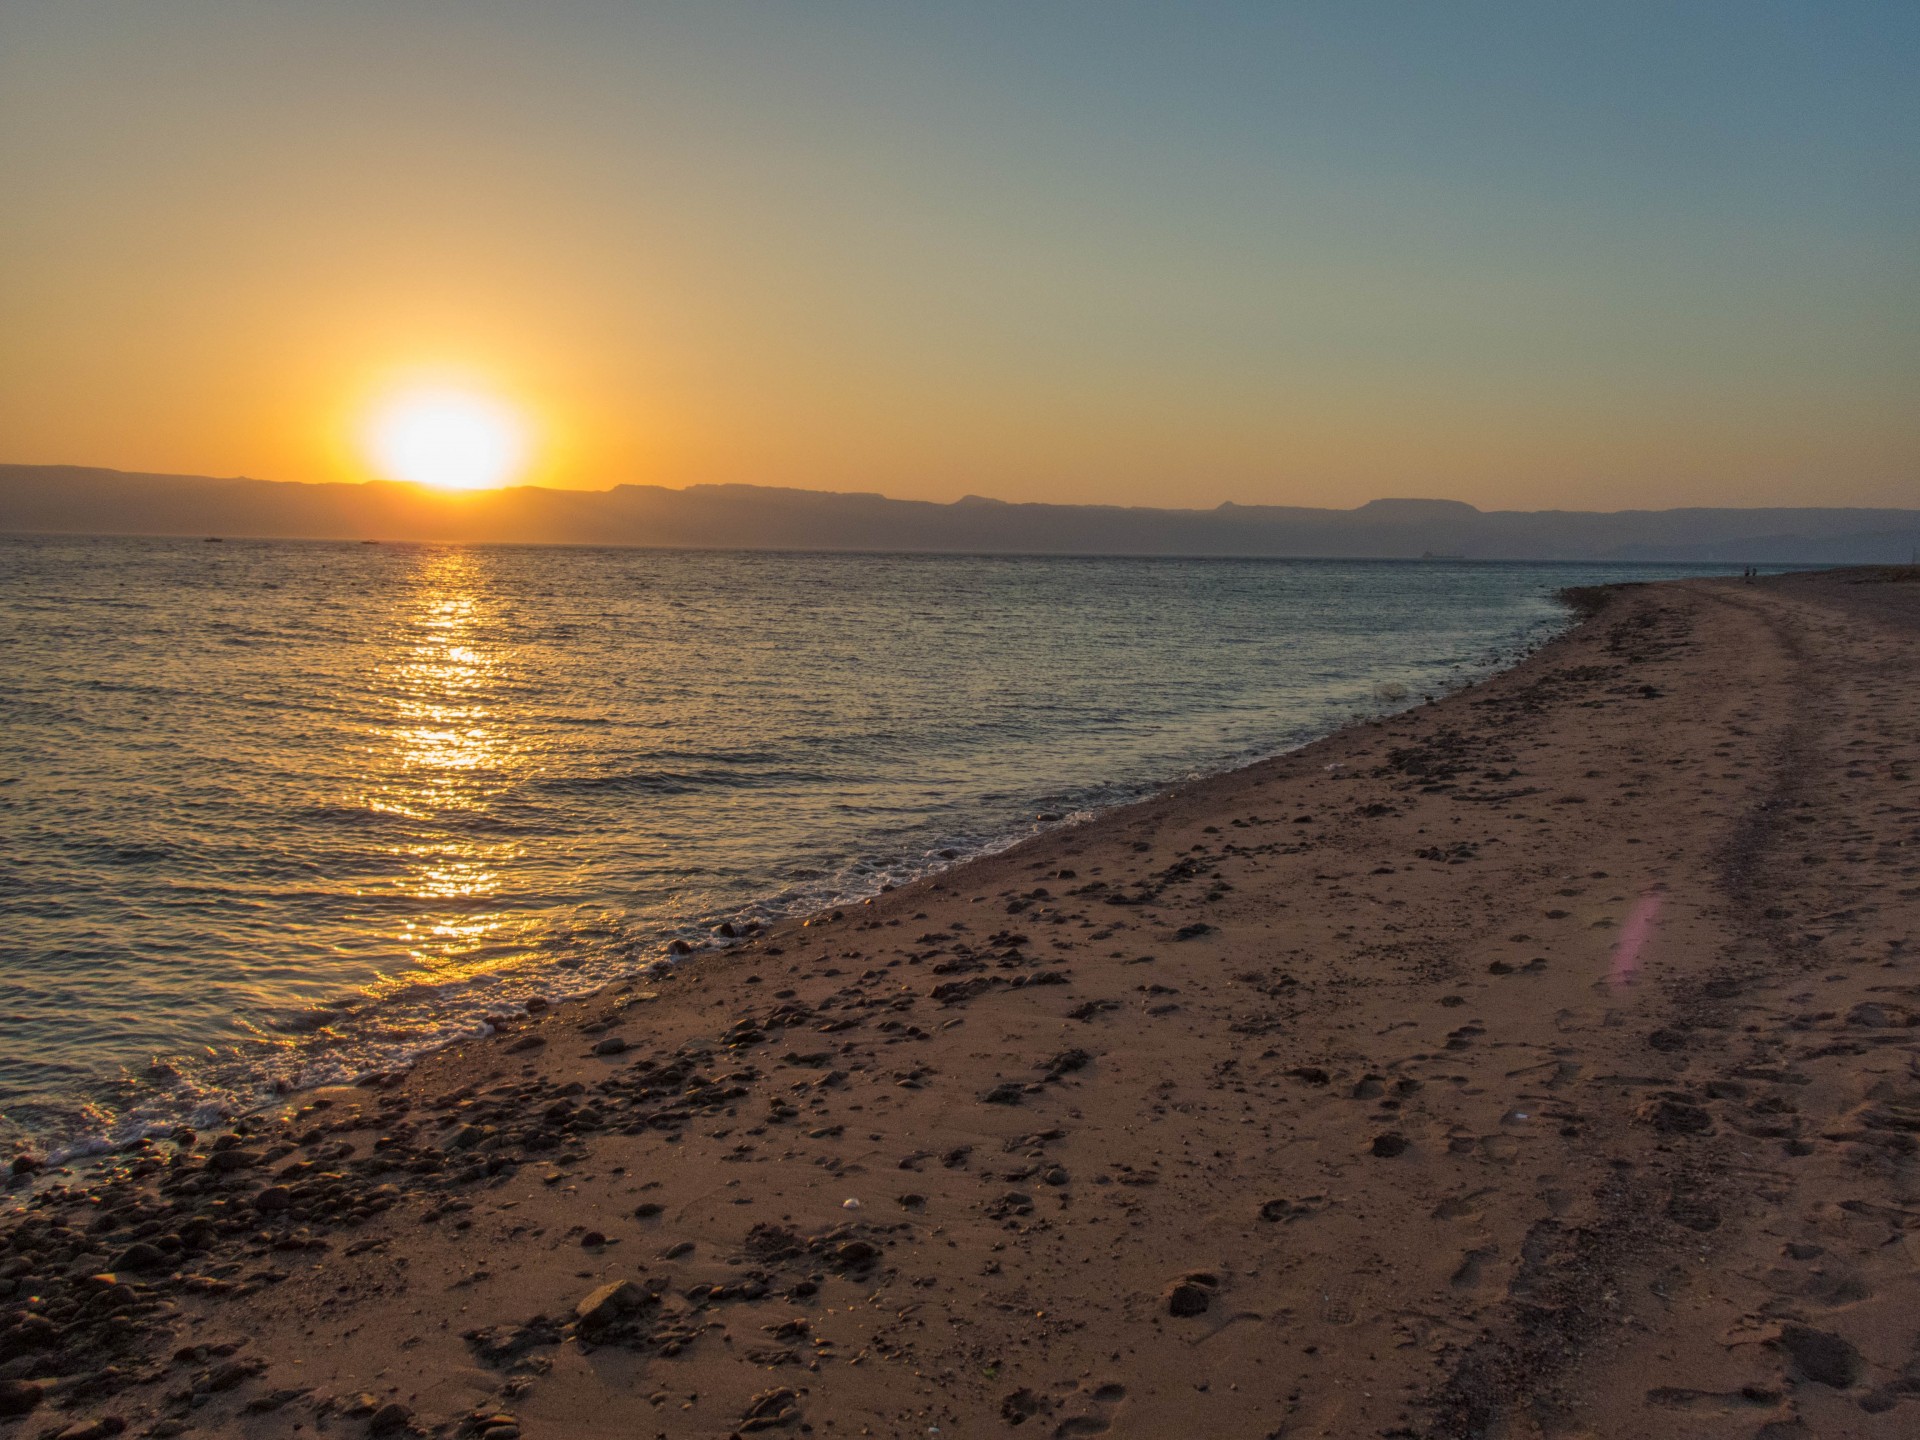 View Red Sea beach during the sunset in Aqaba Jordan.